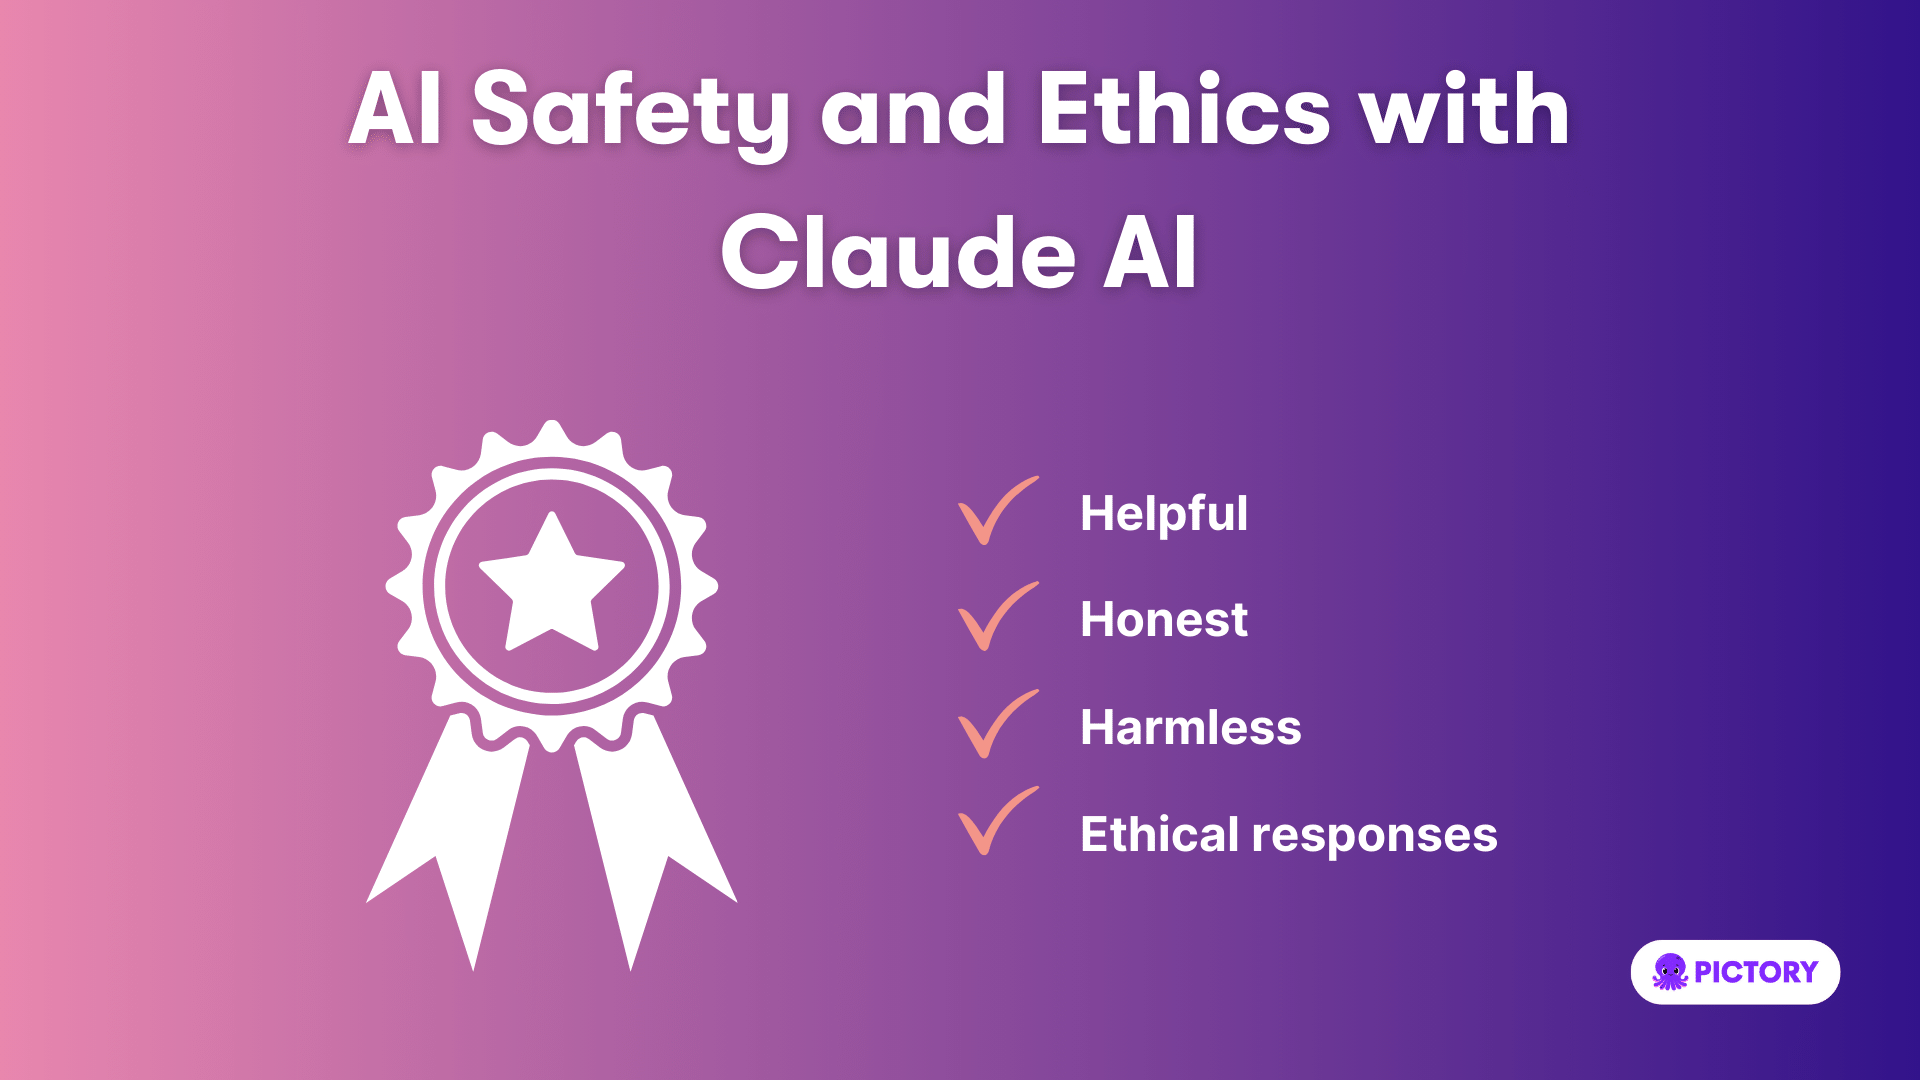 AI Safety and Ethics with Claude AI infographic 